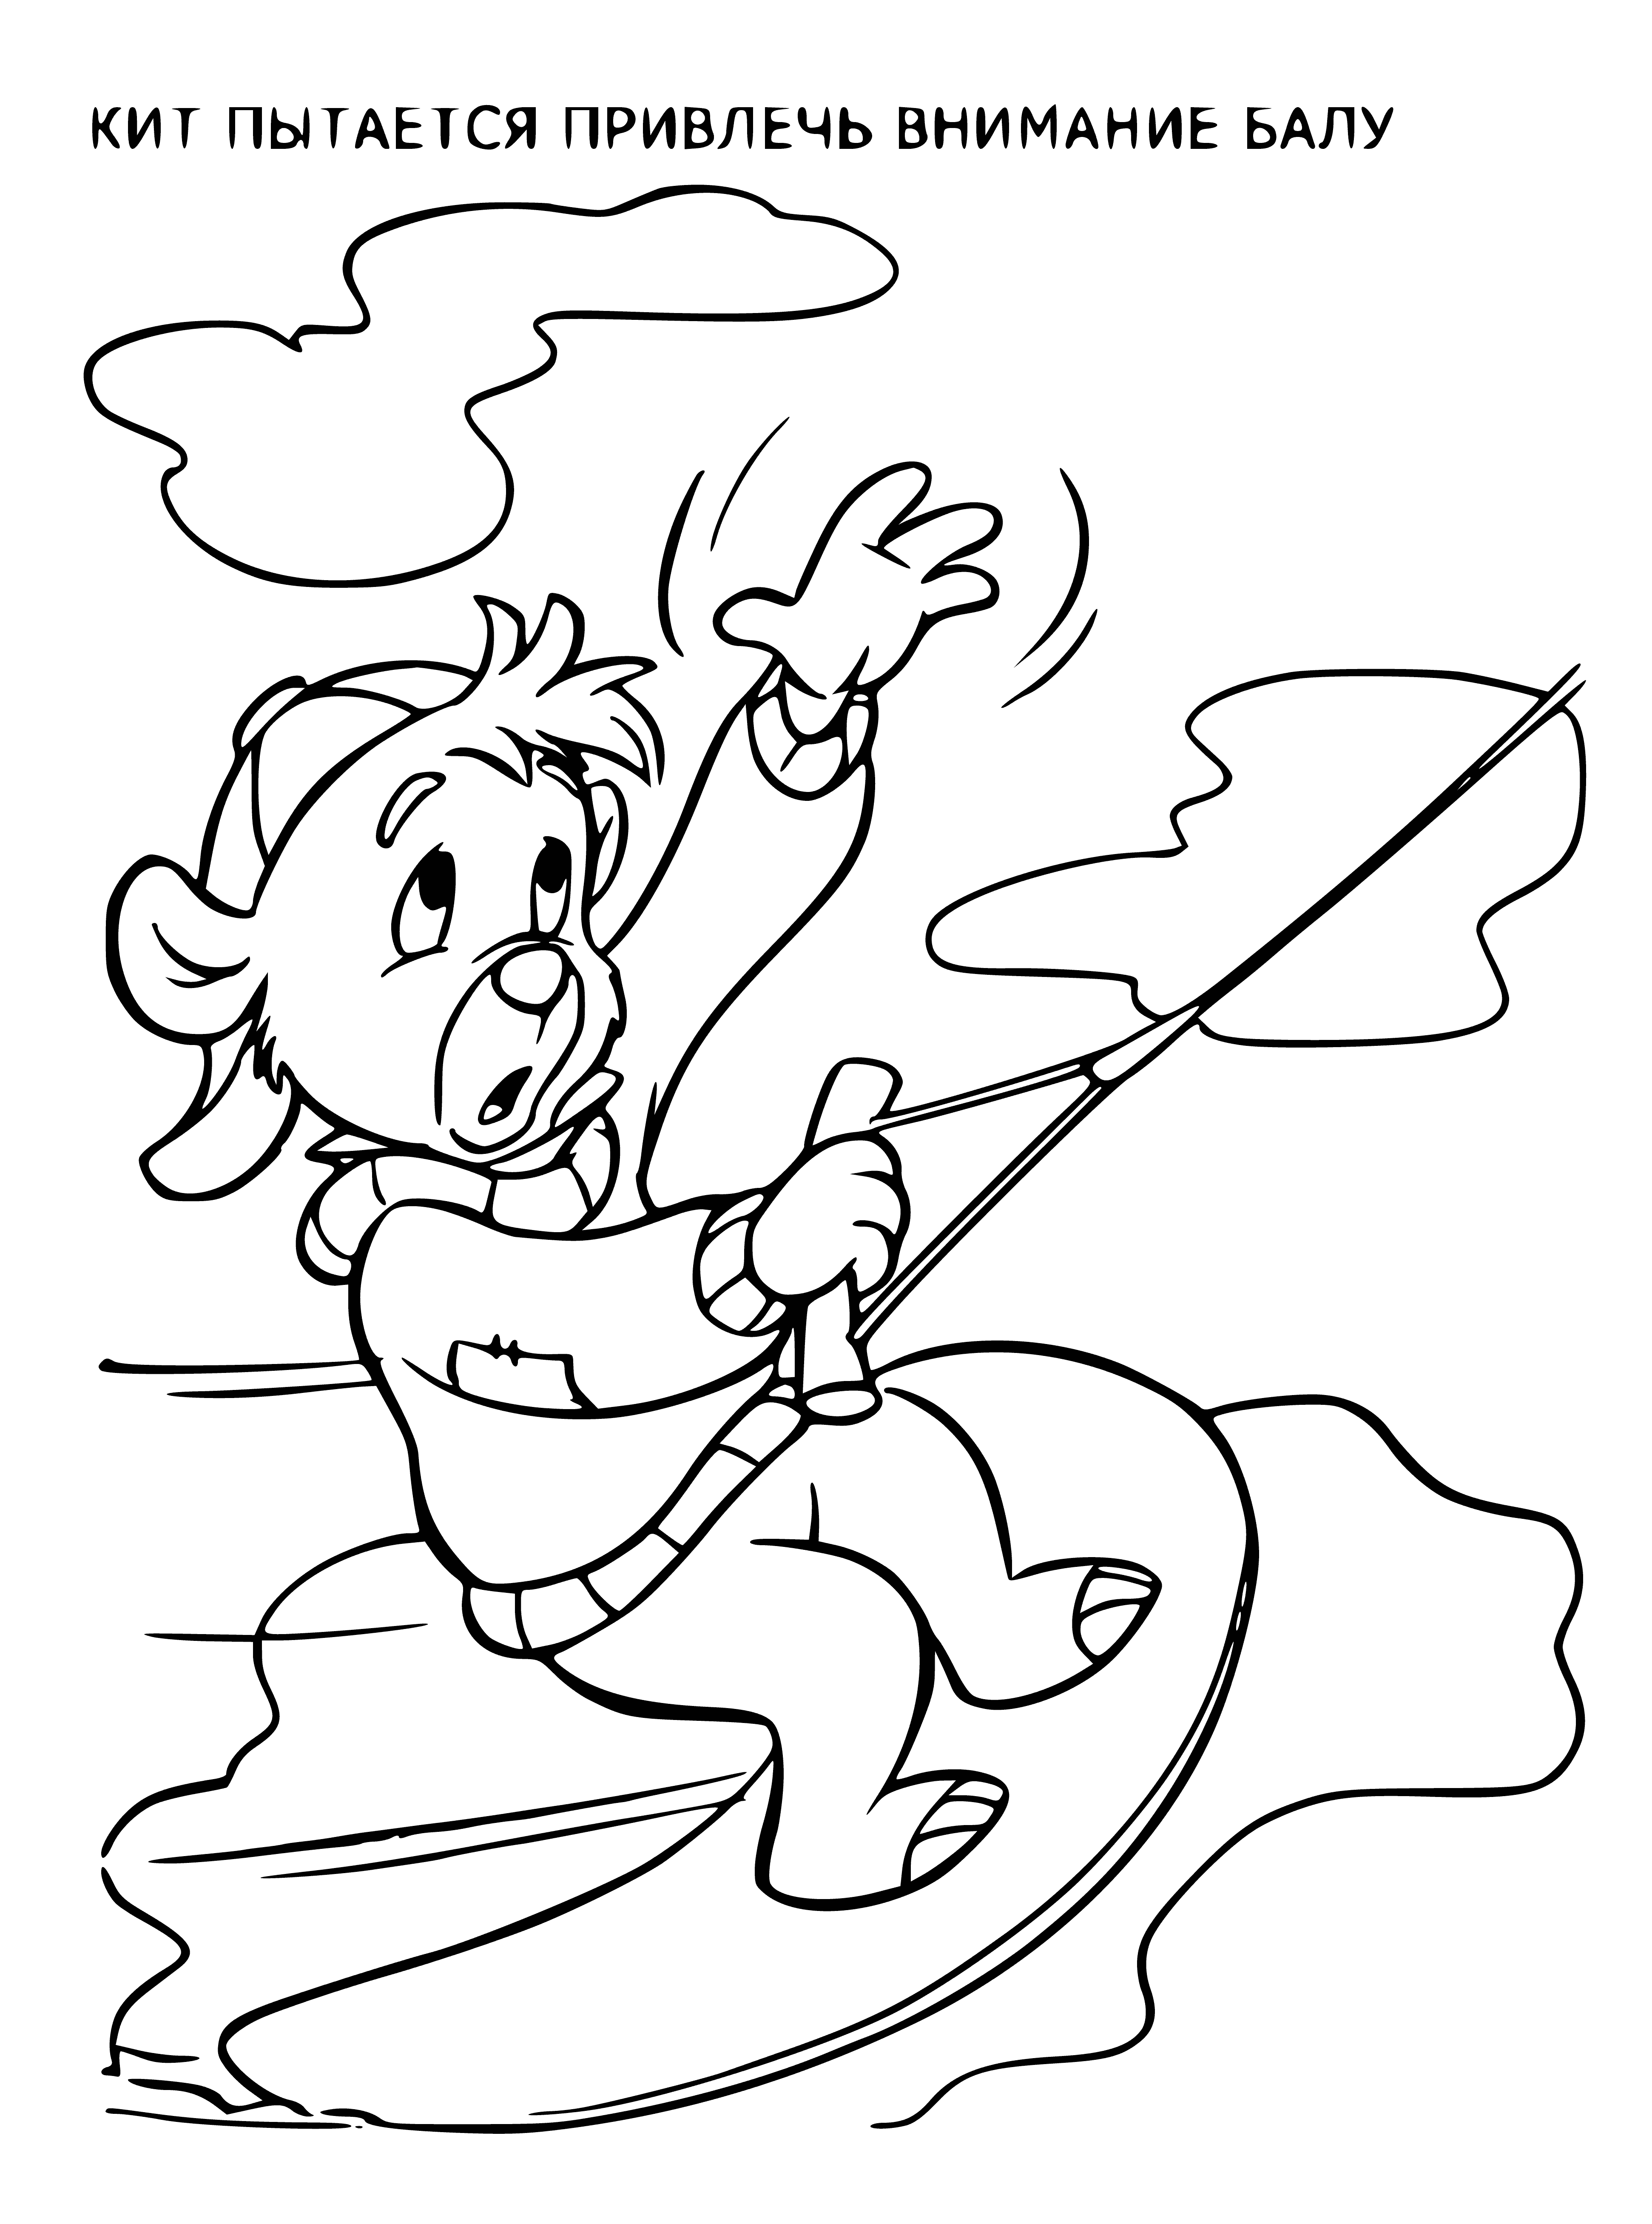 The whale is signaling coloring page